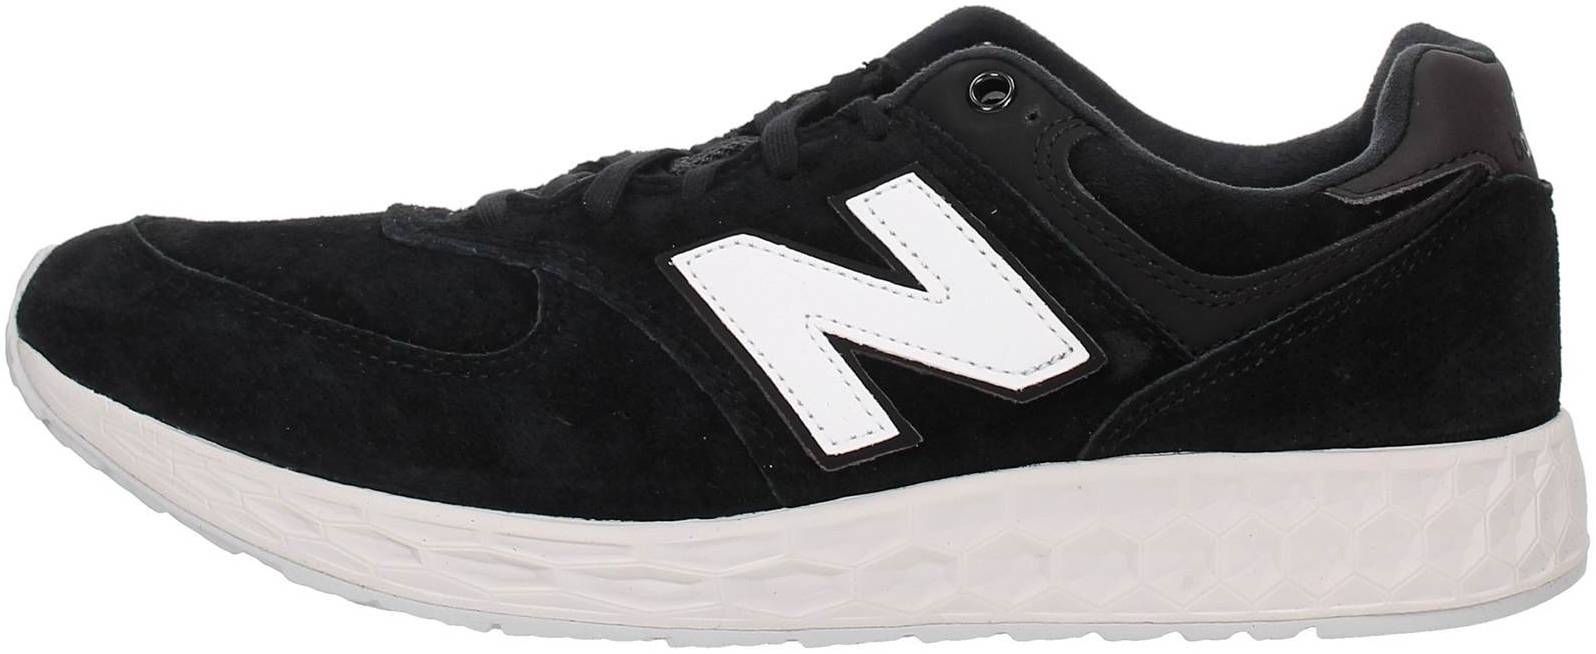 above erotic Prestige 10+ New Balance 574 sneakers: Save up to 51% | RunRepeat